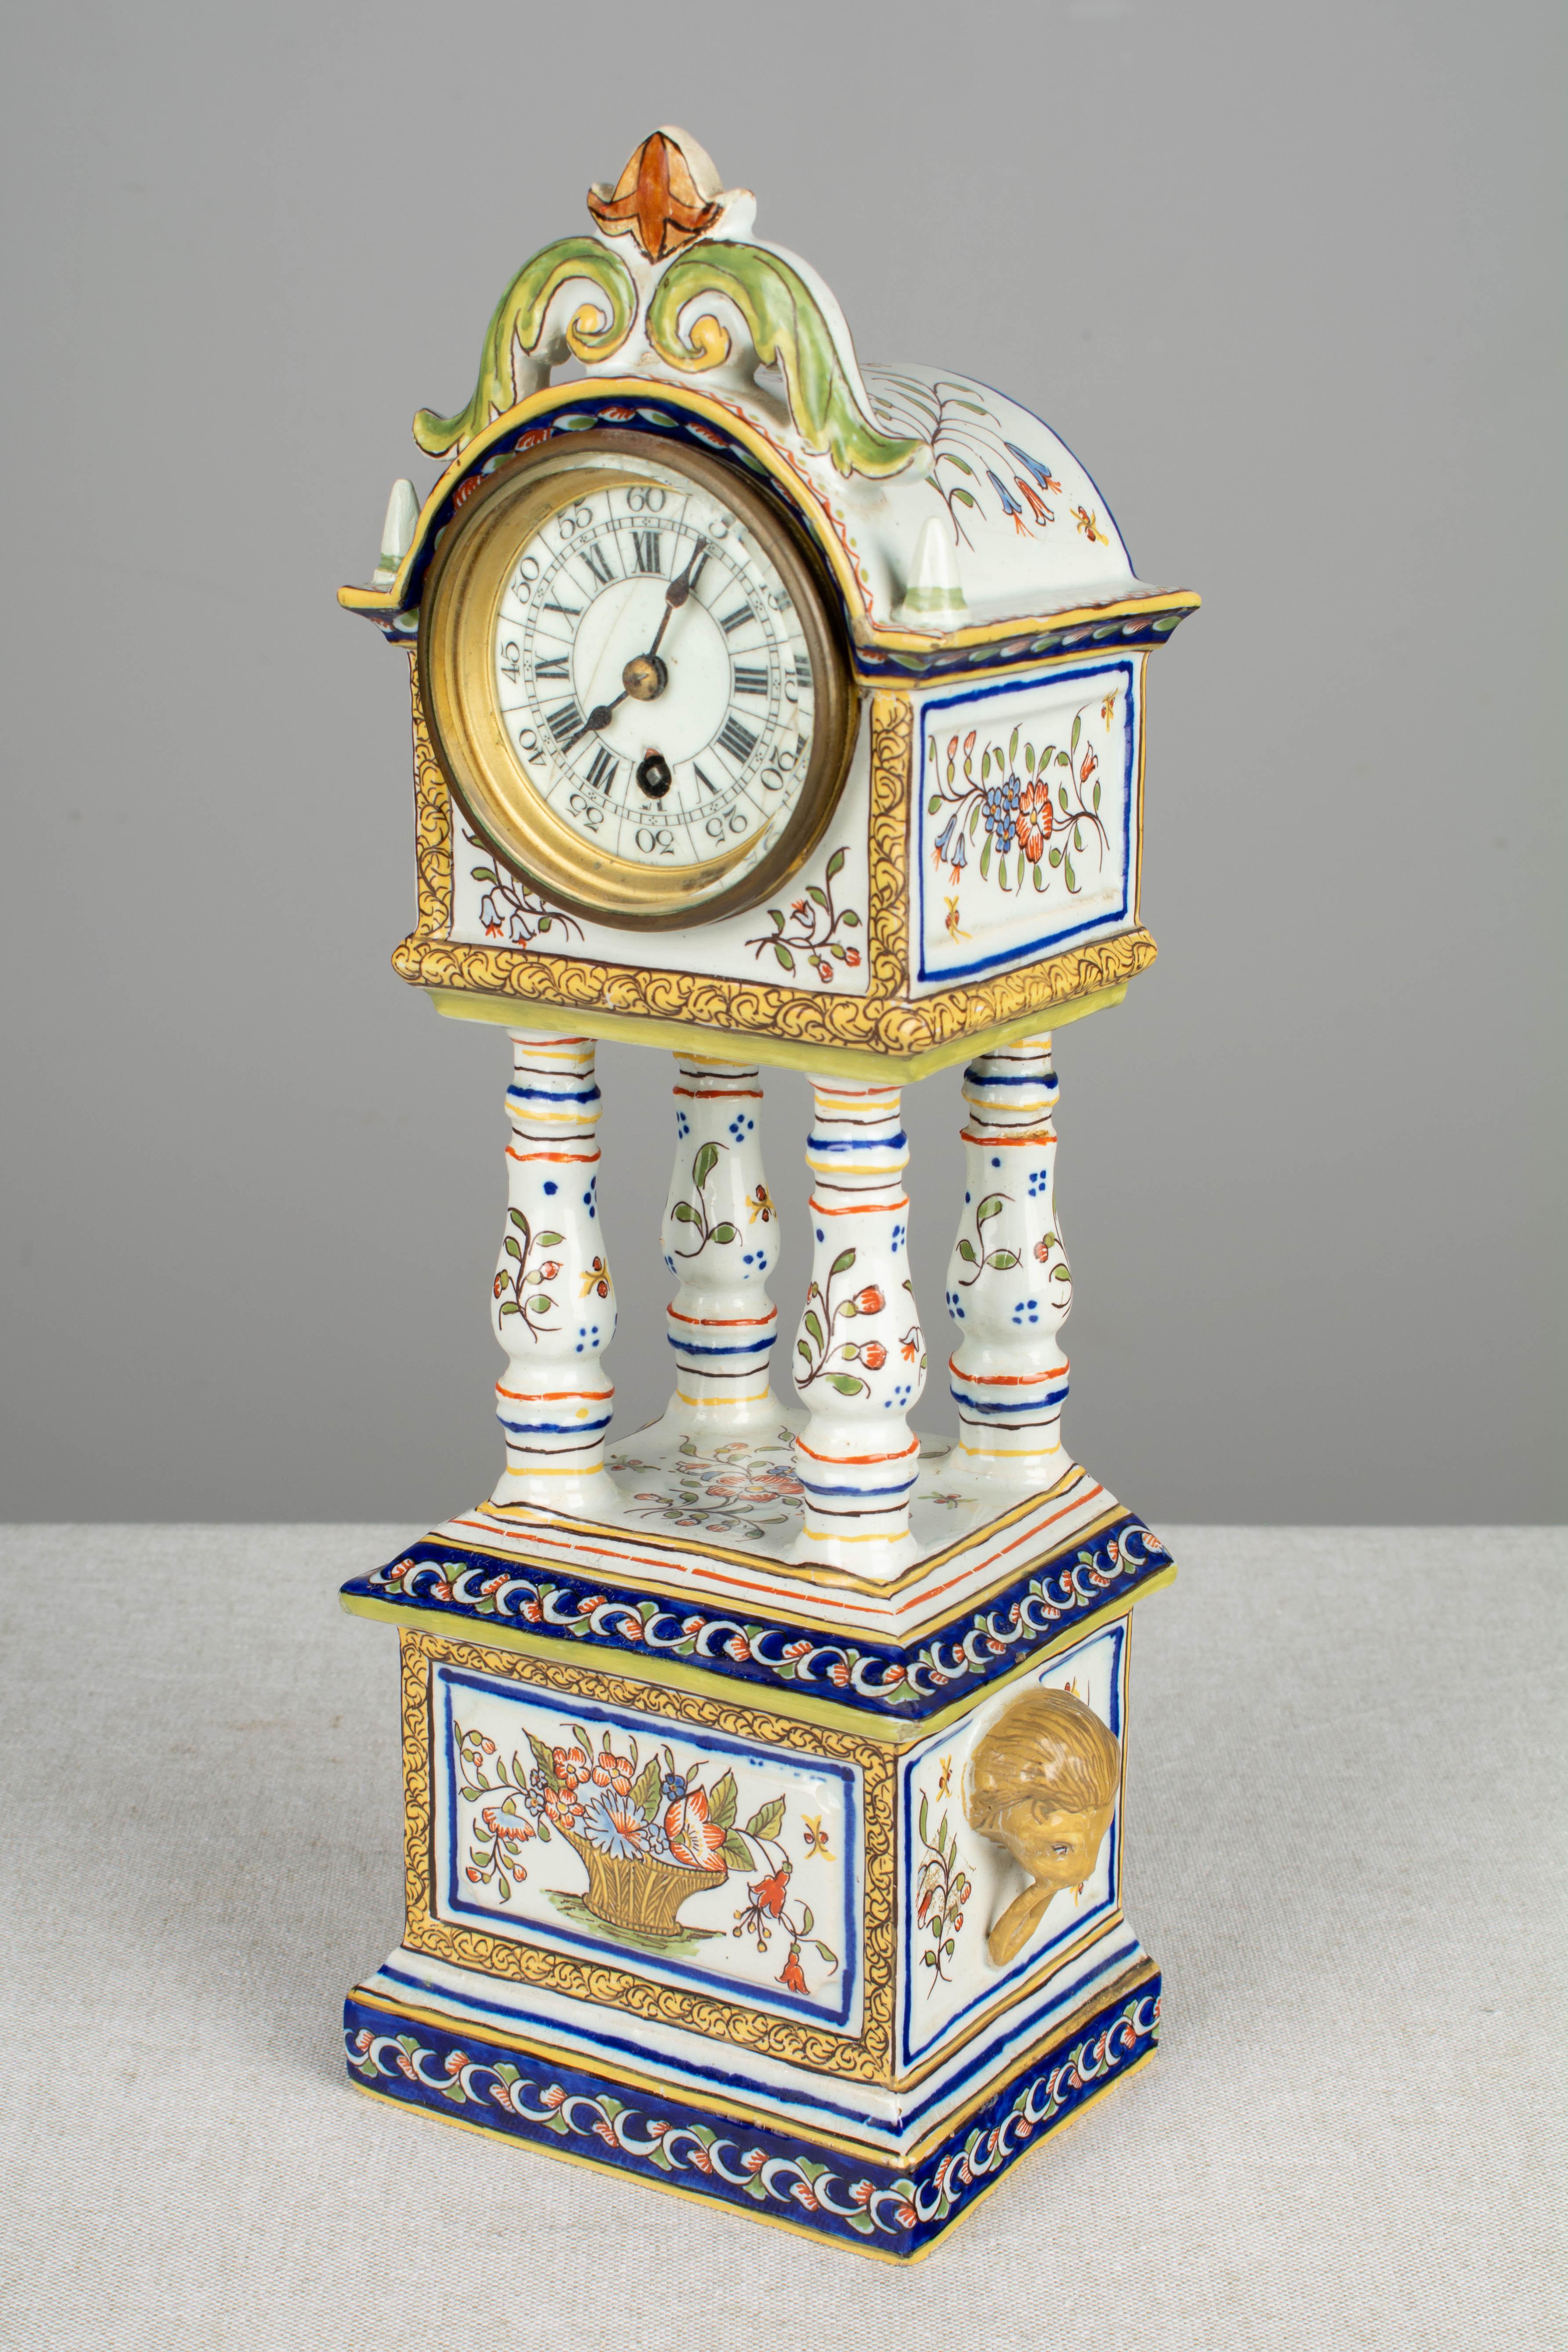 A 19th century French Desvres faience mantle clock, with hand painted floral decoration in the traditional colors of blue yellow, green and orange. Plinth base with lion head prunts on each side and raised on four columns. Arched crown with a small